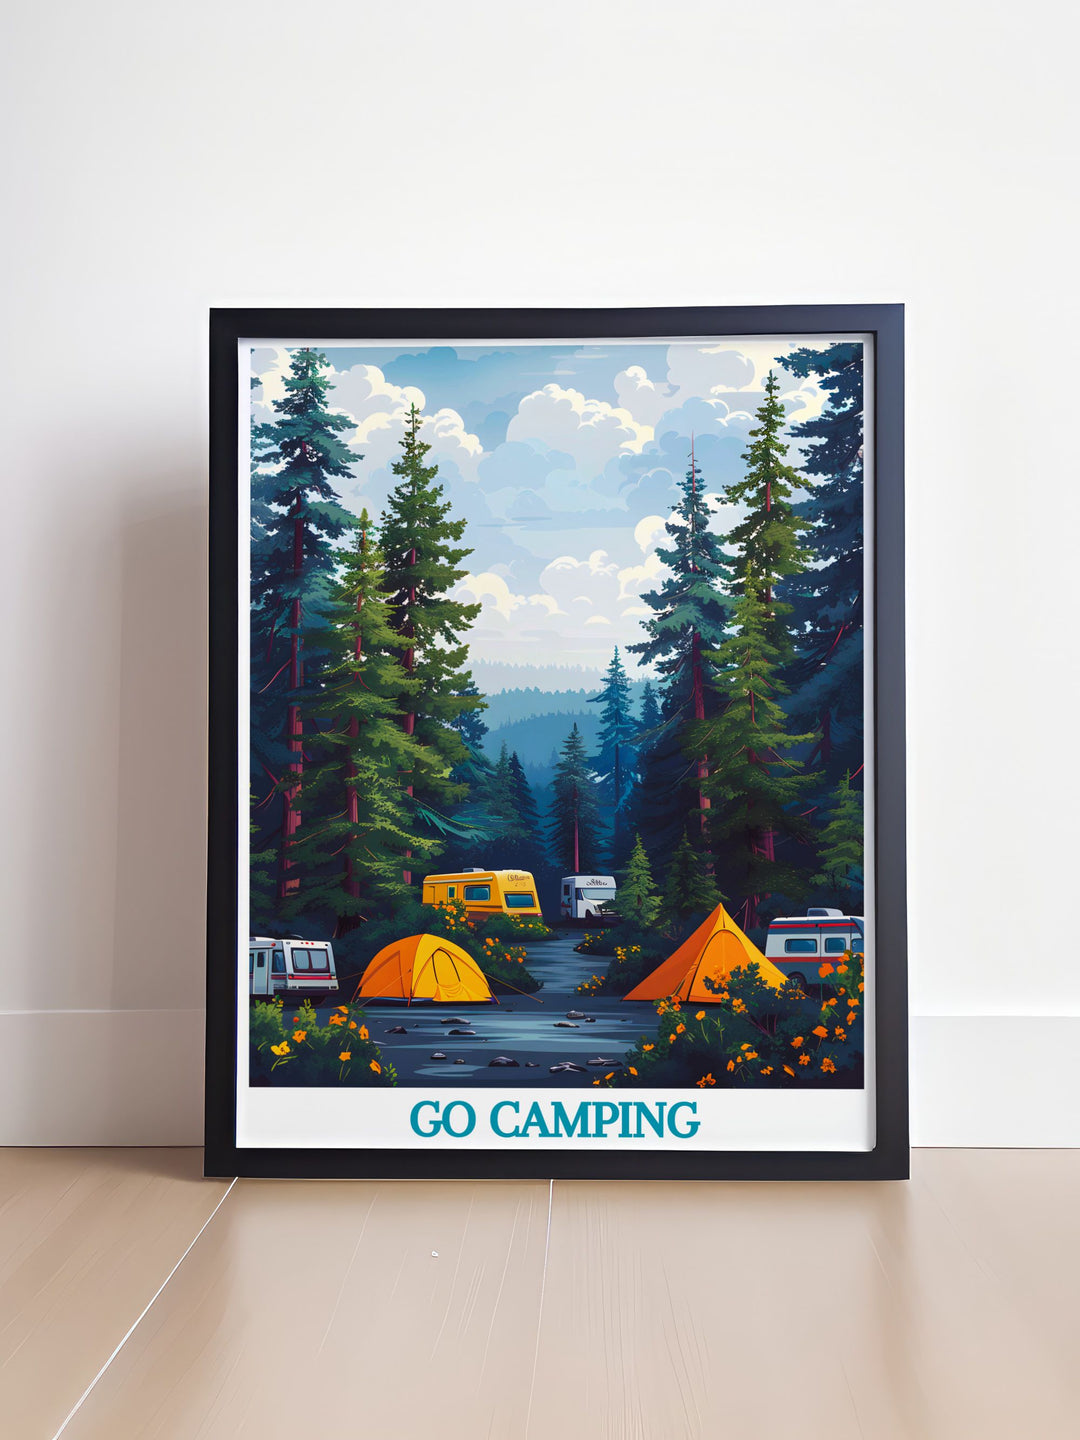 Custom print of a serene camping site in a lush forest, illustrating the beauty of outdoor adventures and the simplicity of vanlife, ideal for those who appreciate nature and freedom.